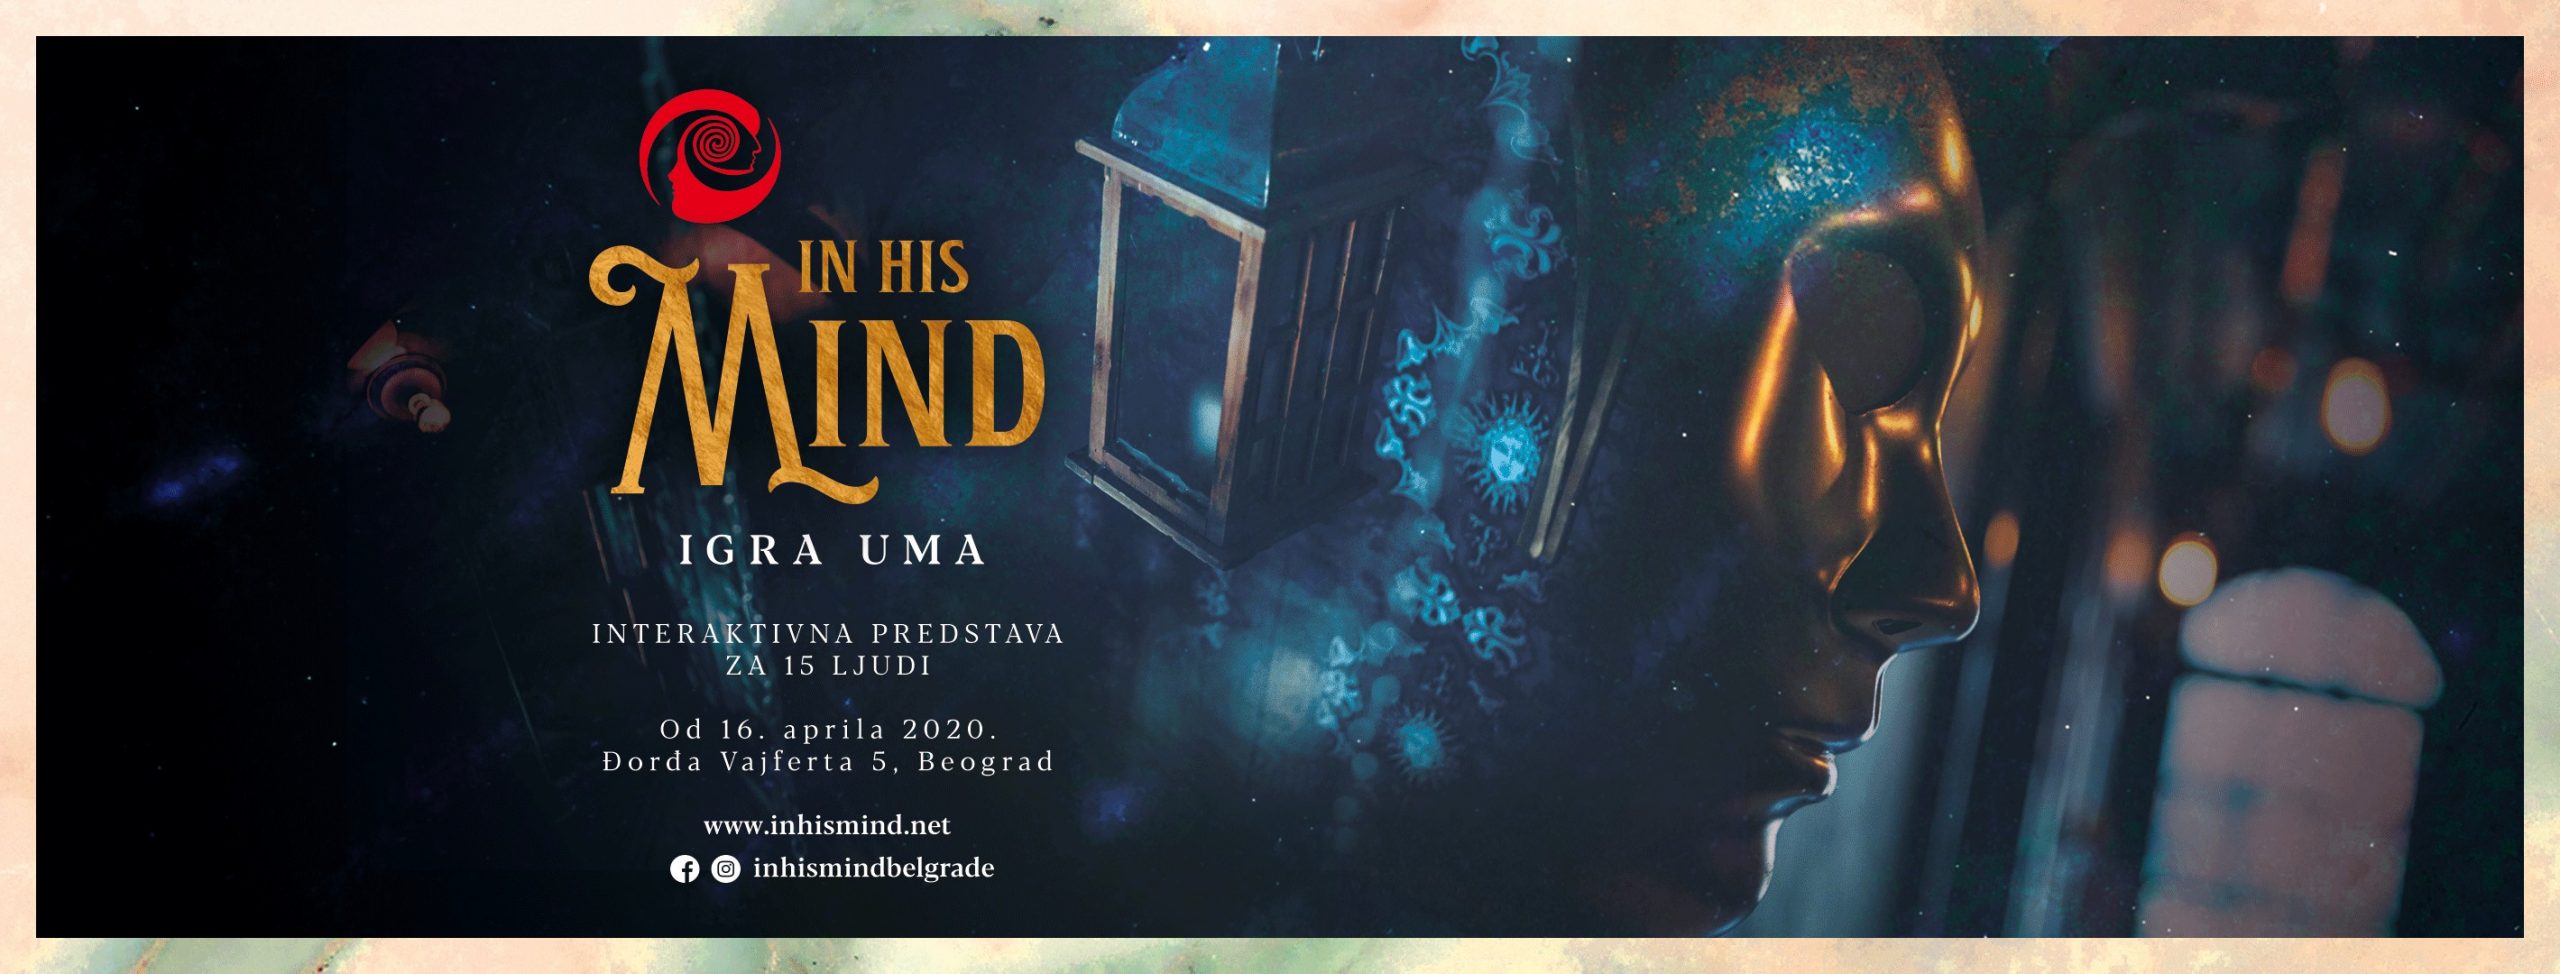 In his Mind - Immersive Jack the Ripper Play in Belgrade